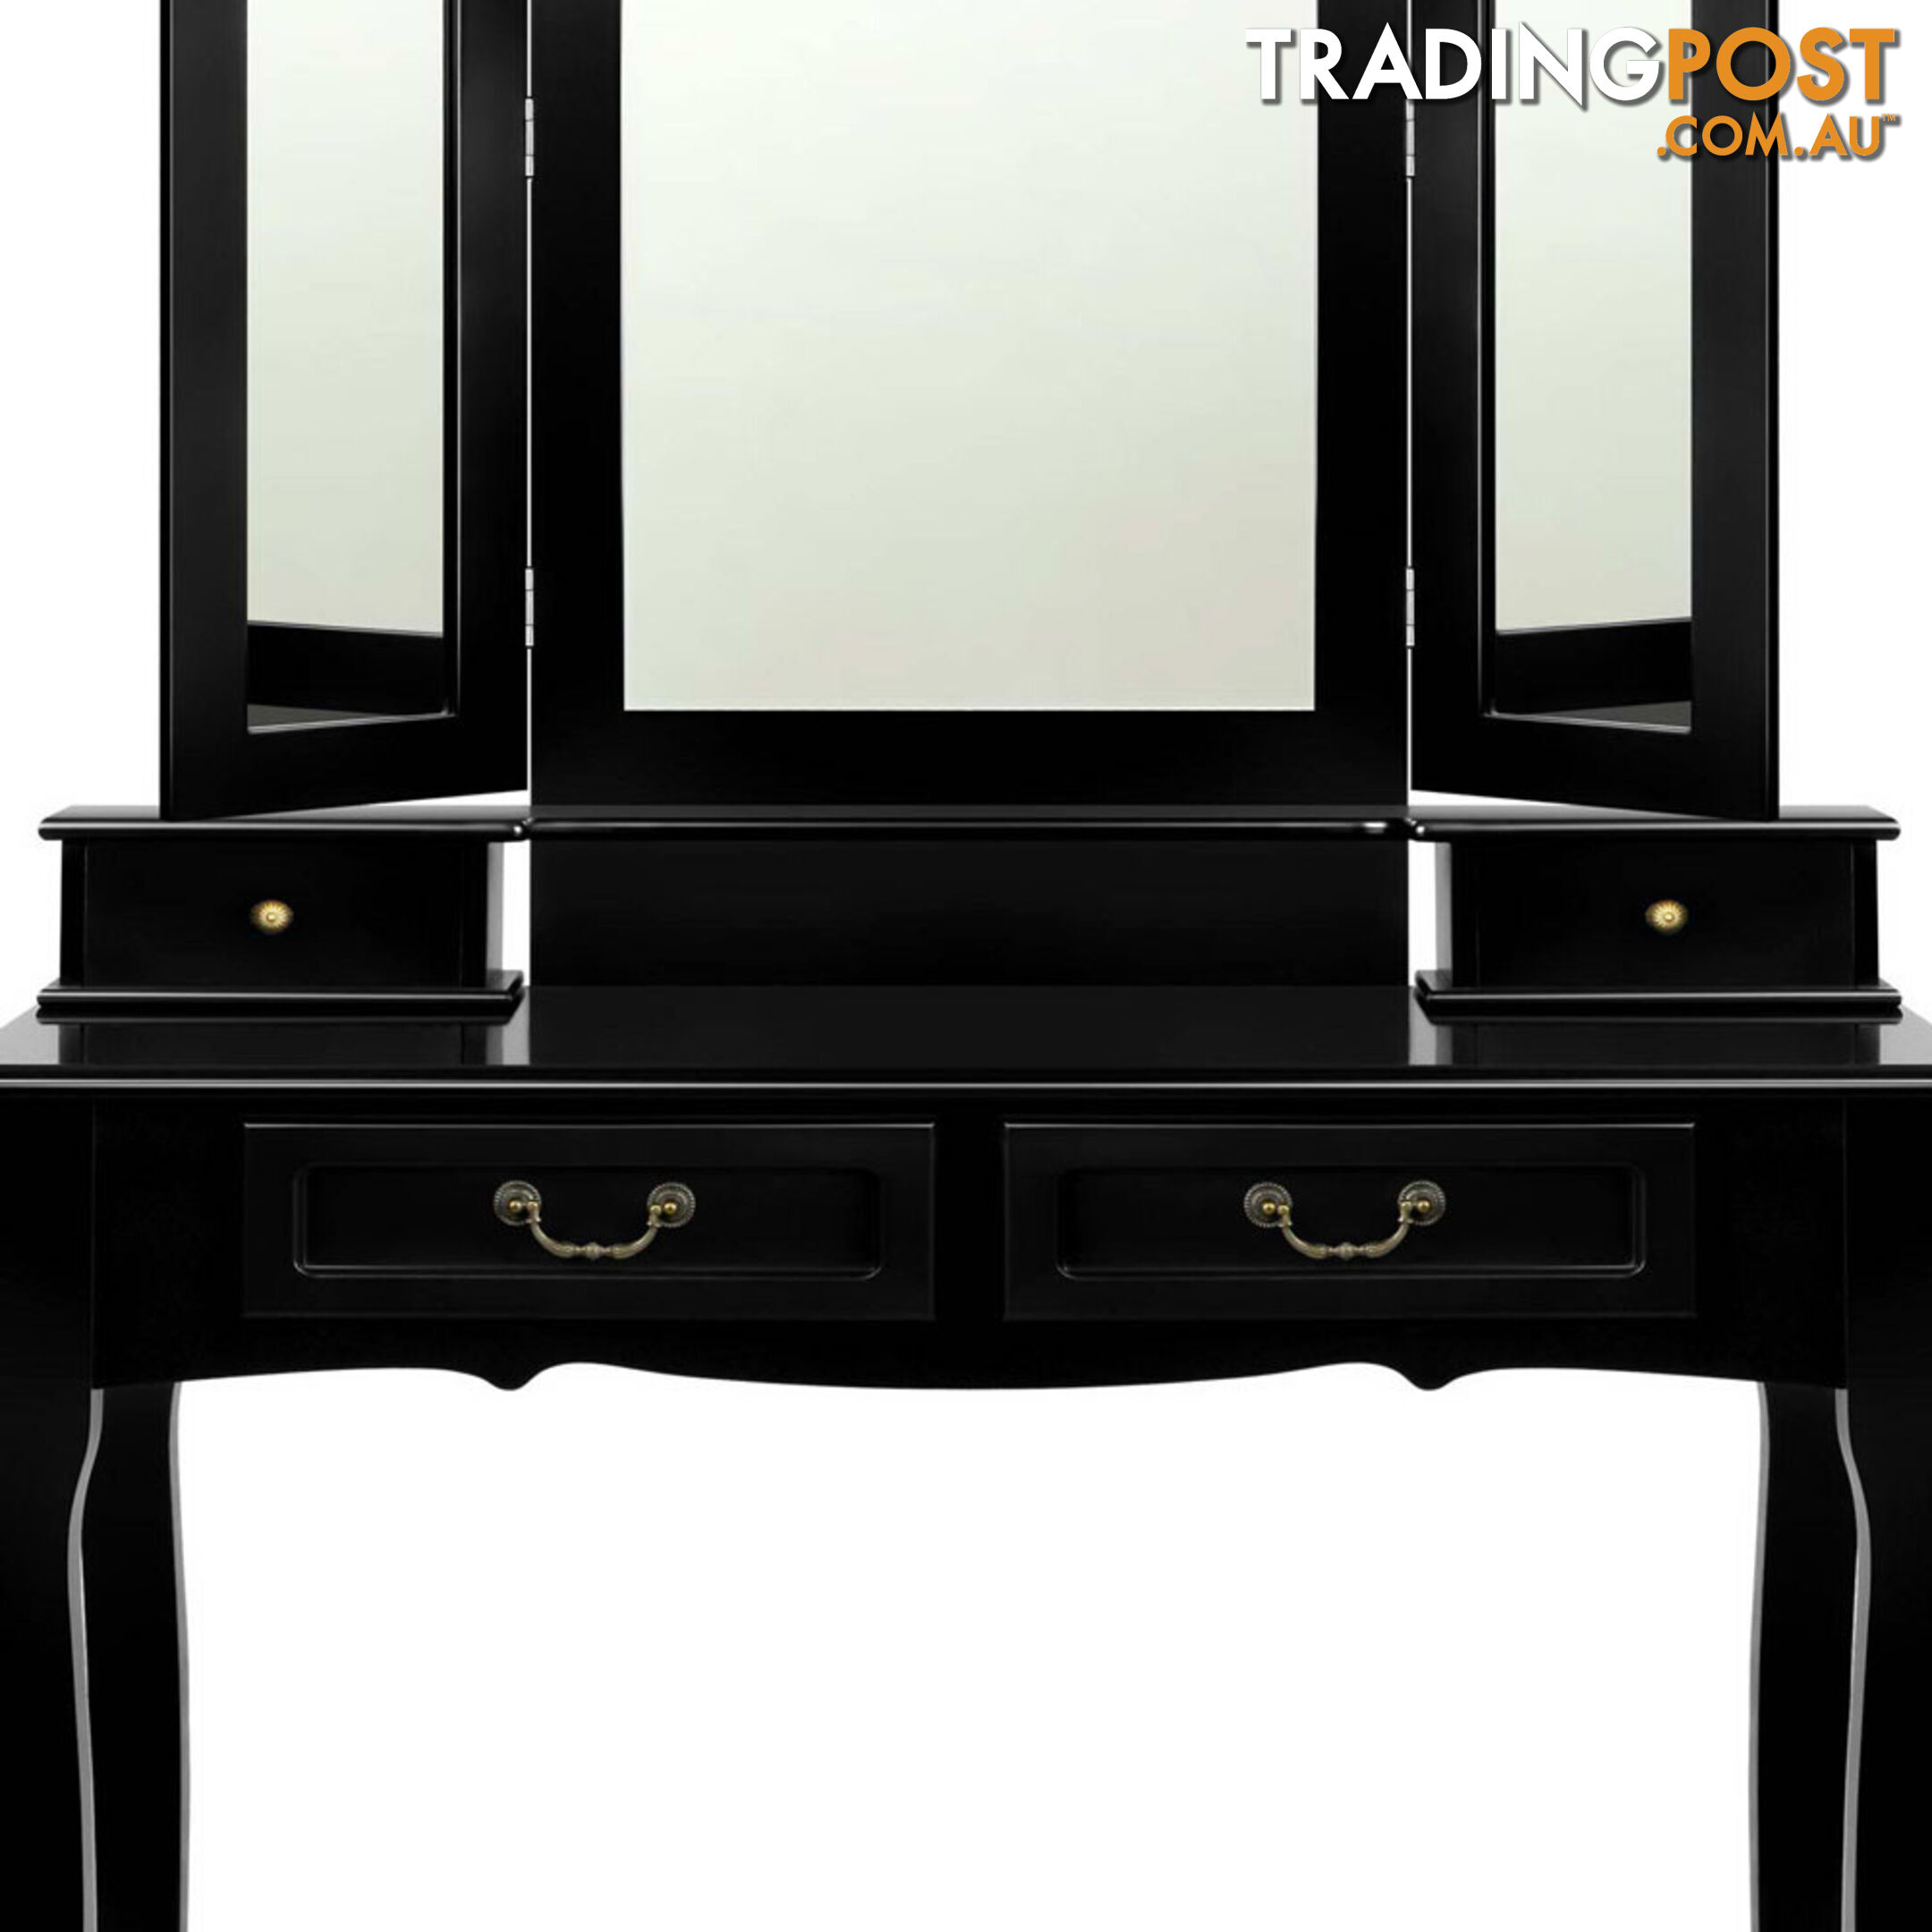 4 Drawer Dressing Table with Mirror - Black